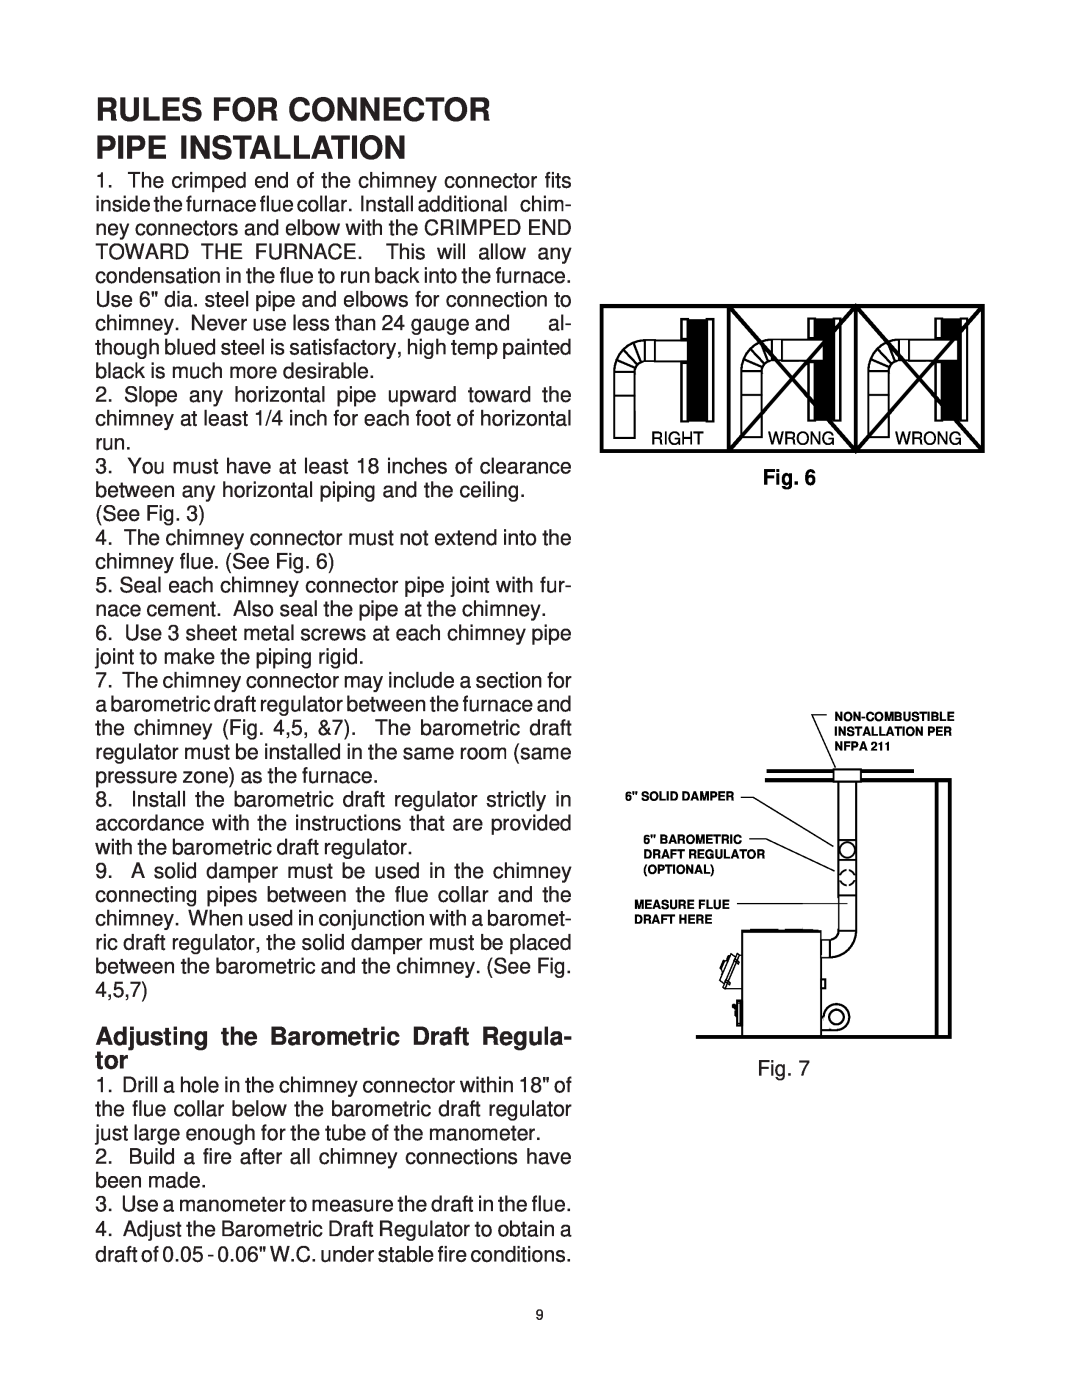 United States Stove 1537G owner manual Rules For Connector Pipe Installation, Adjusting the Barometric Draft Regula- tor 